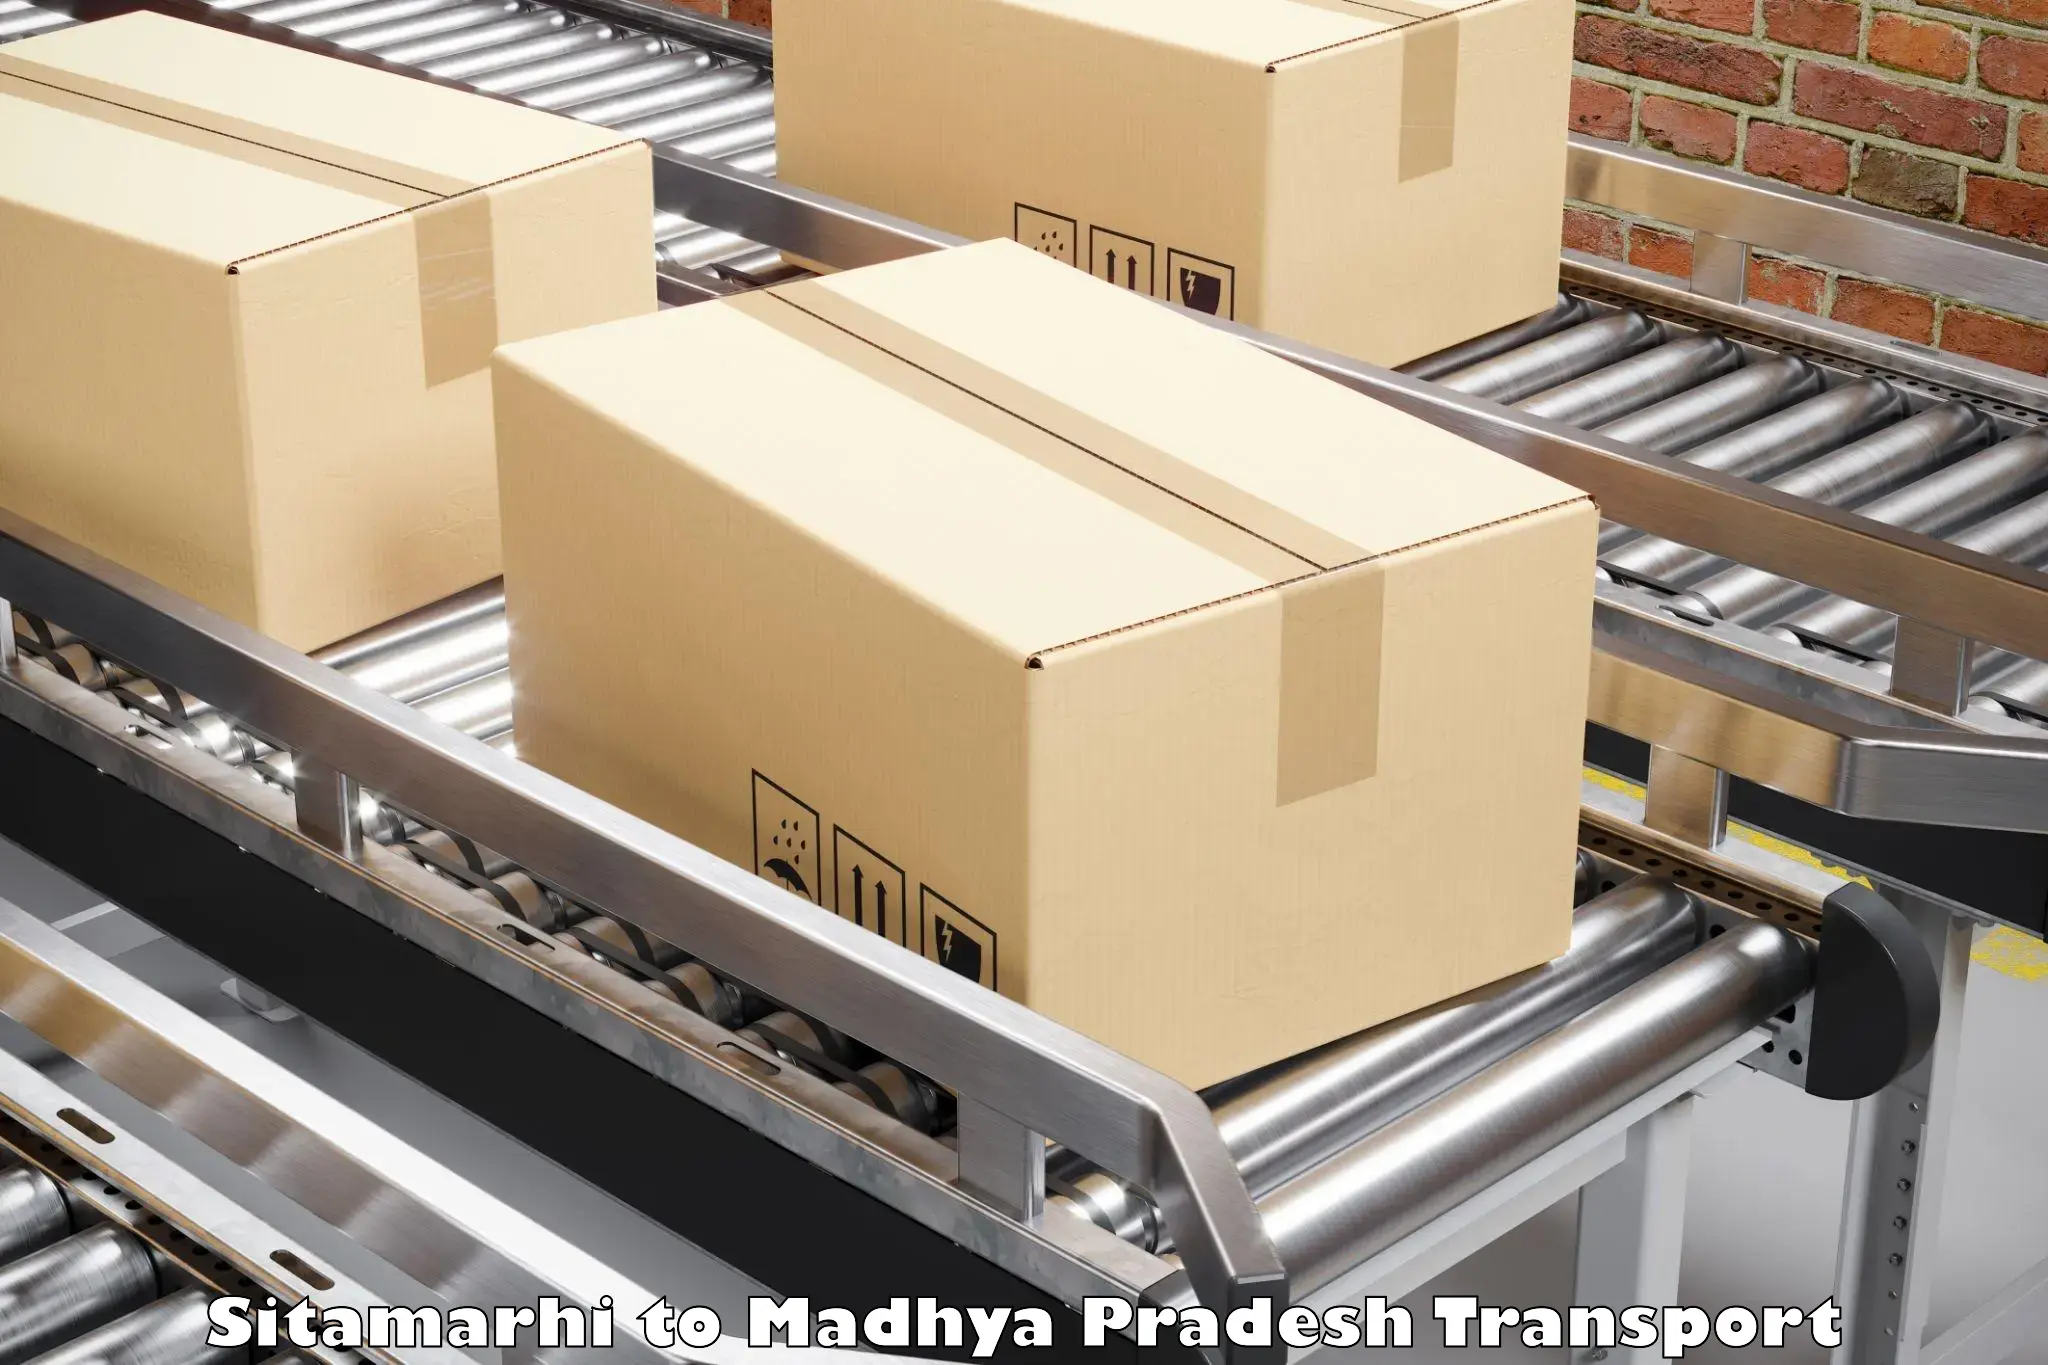 Container transport service Sitamarhi to BHEL Bhopal